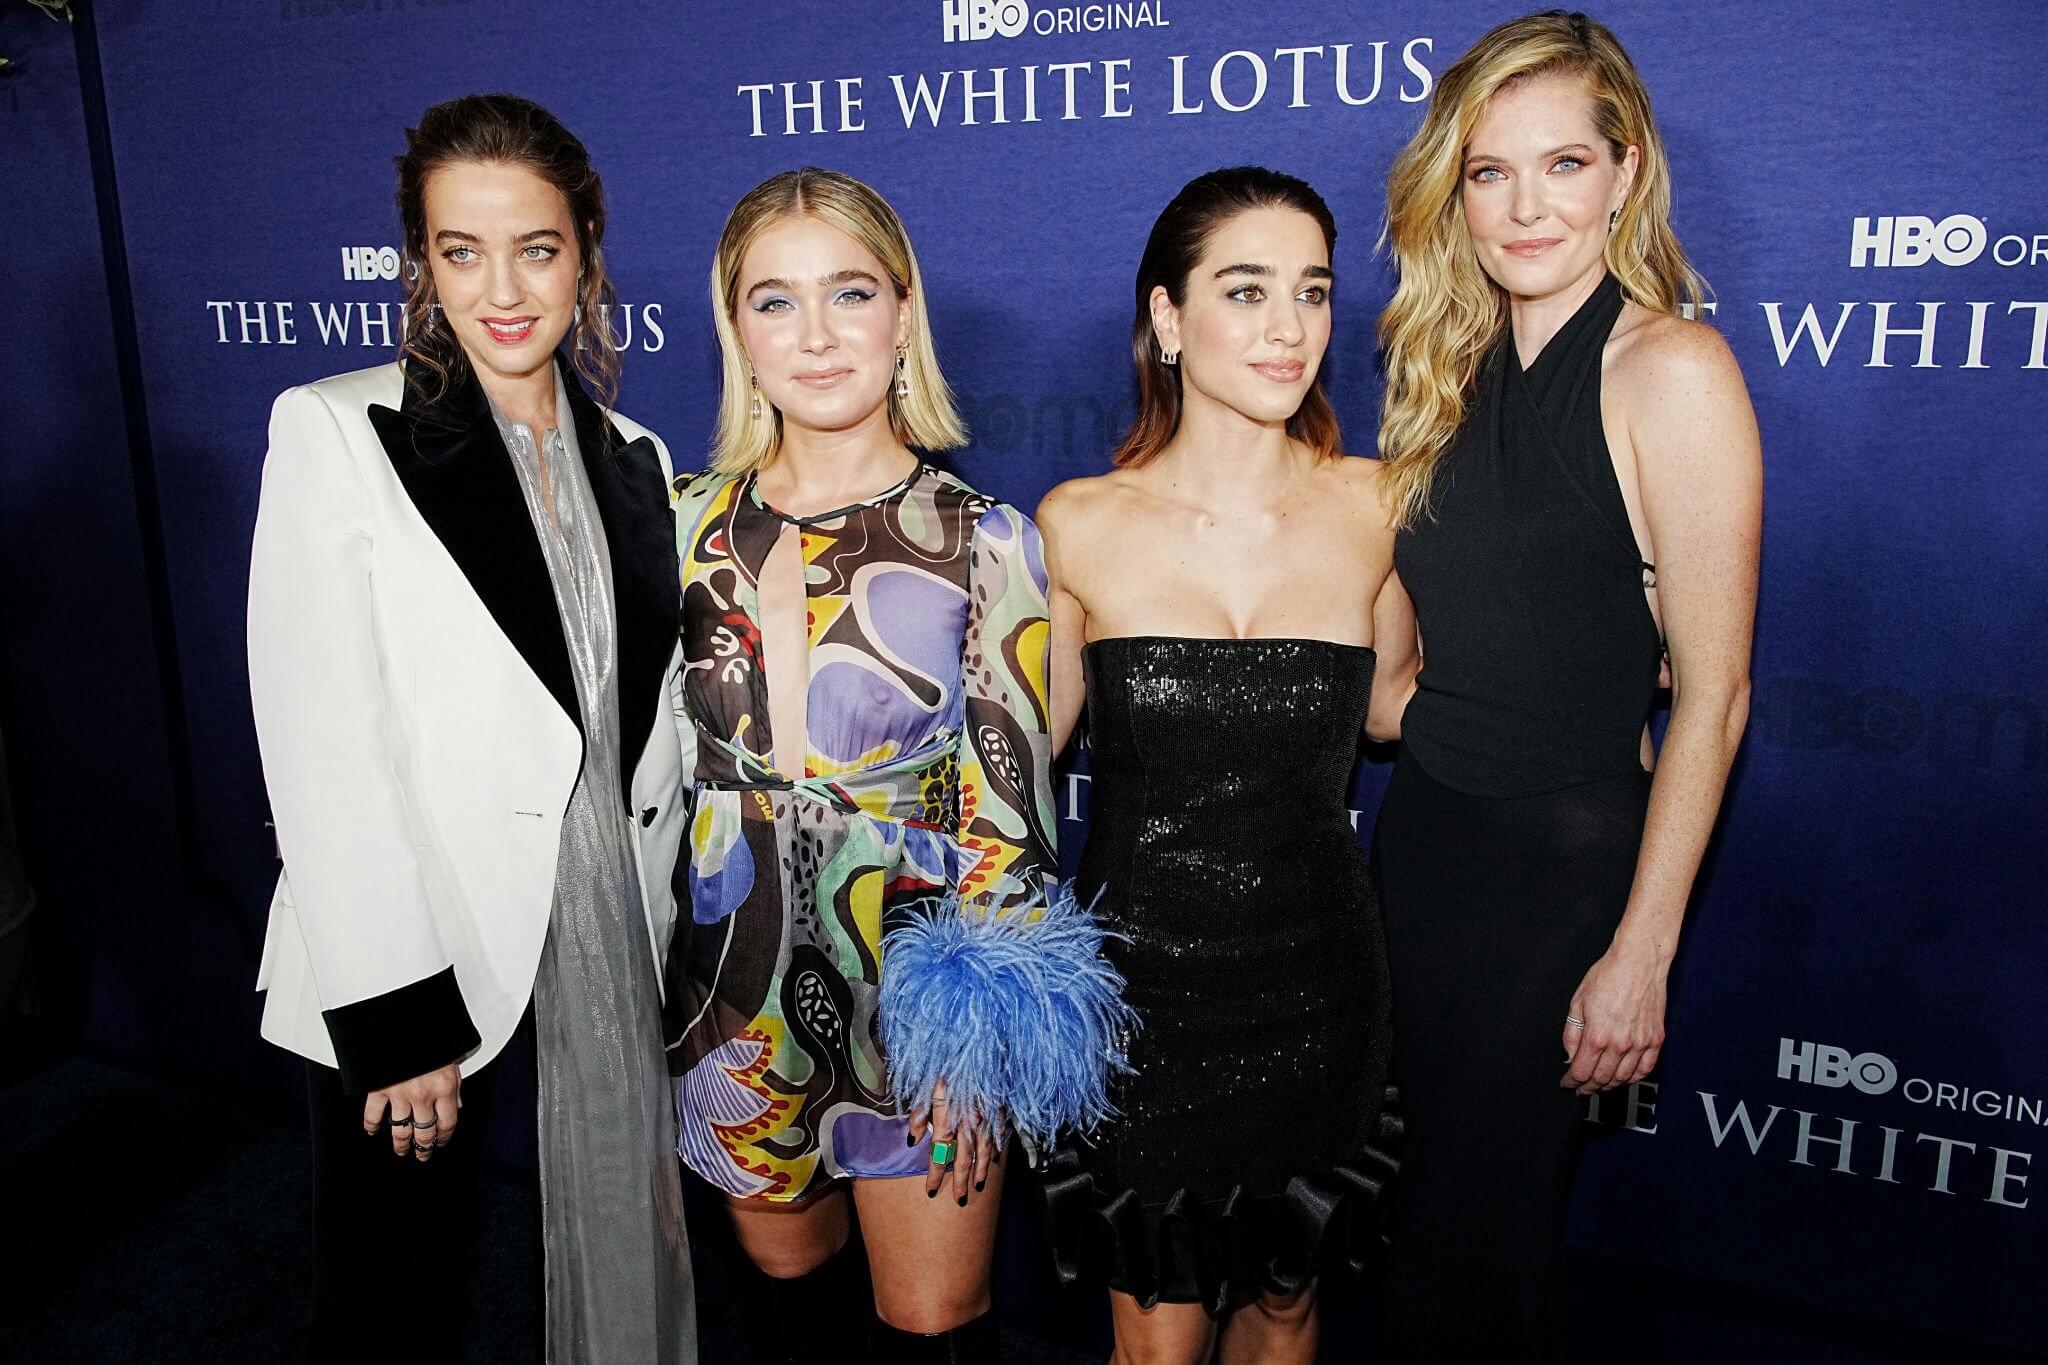 (L-R) Beatrice Grannò, Haley Lu Richardson, Simona Tabasco, and Meghann Fahy at the Los Angeles Season 2 Premiere of HBO Original Series “The White Lotus” held at Goya Studios on October 20, 2022 in Los Angeles, California.